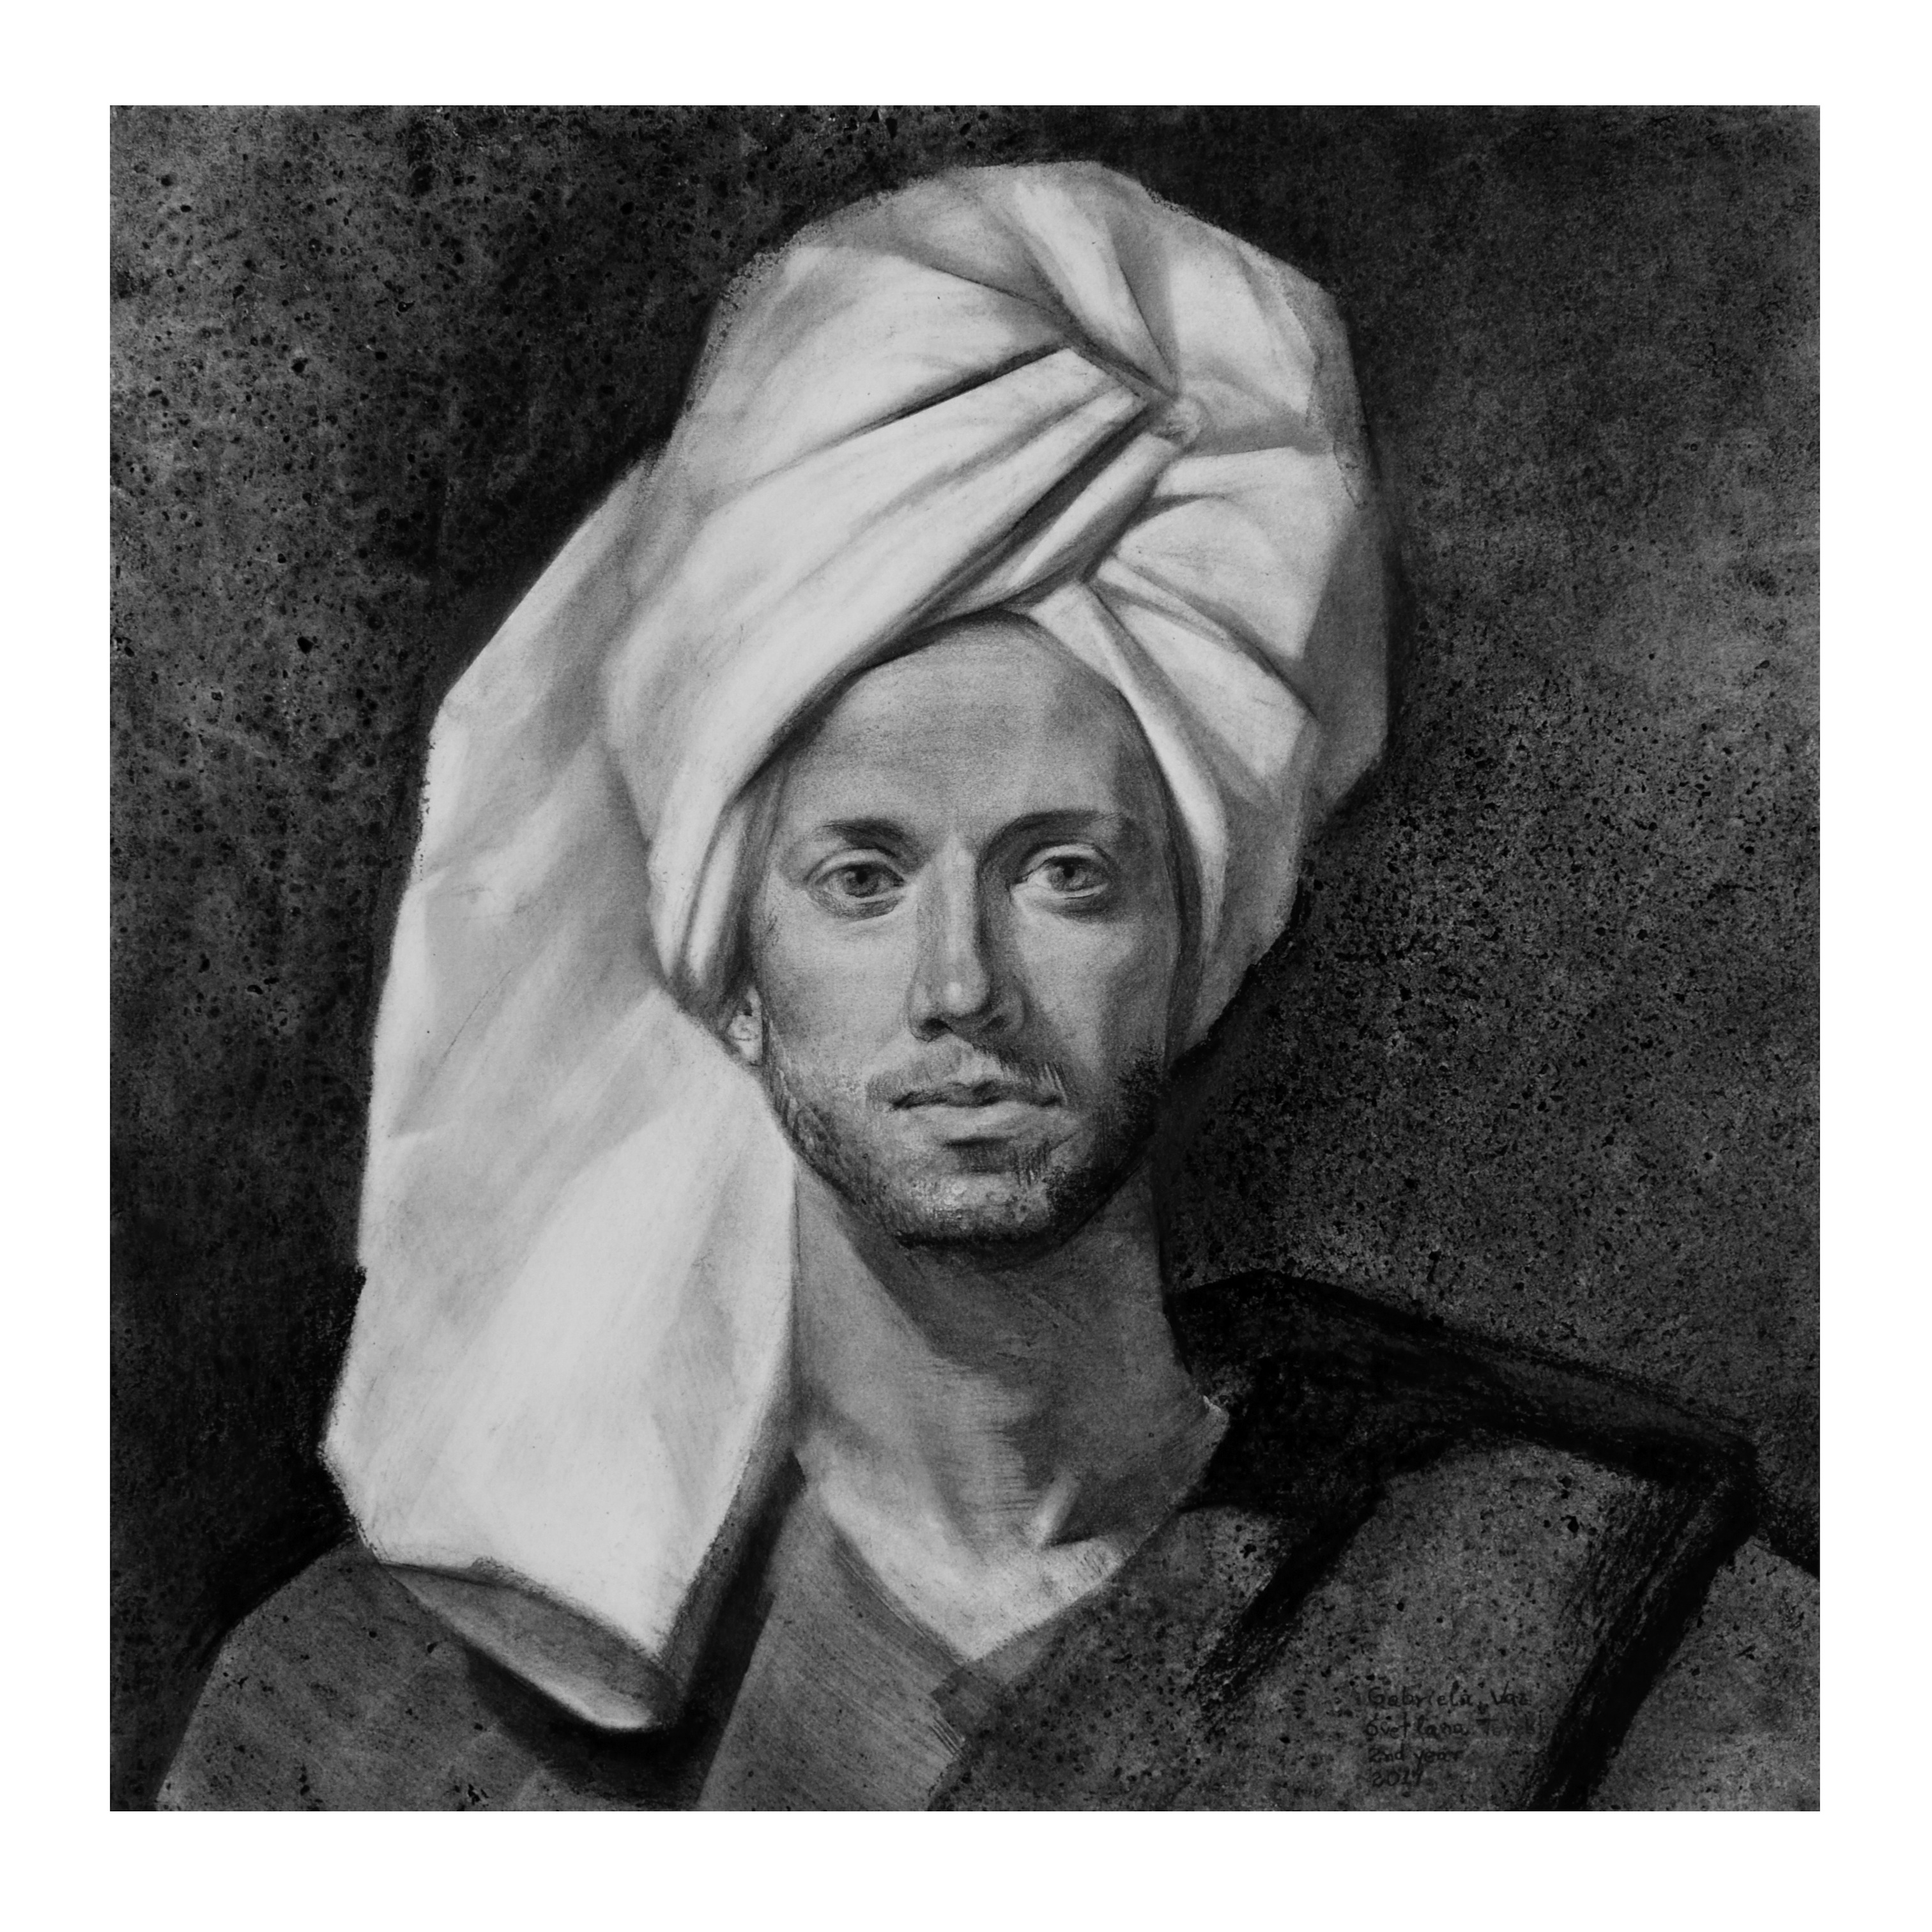 The man with turban